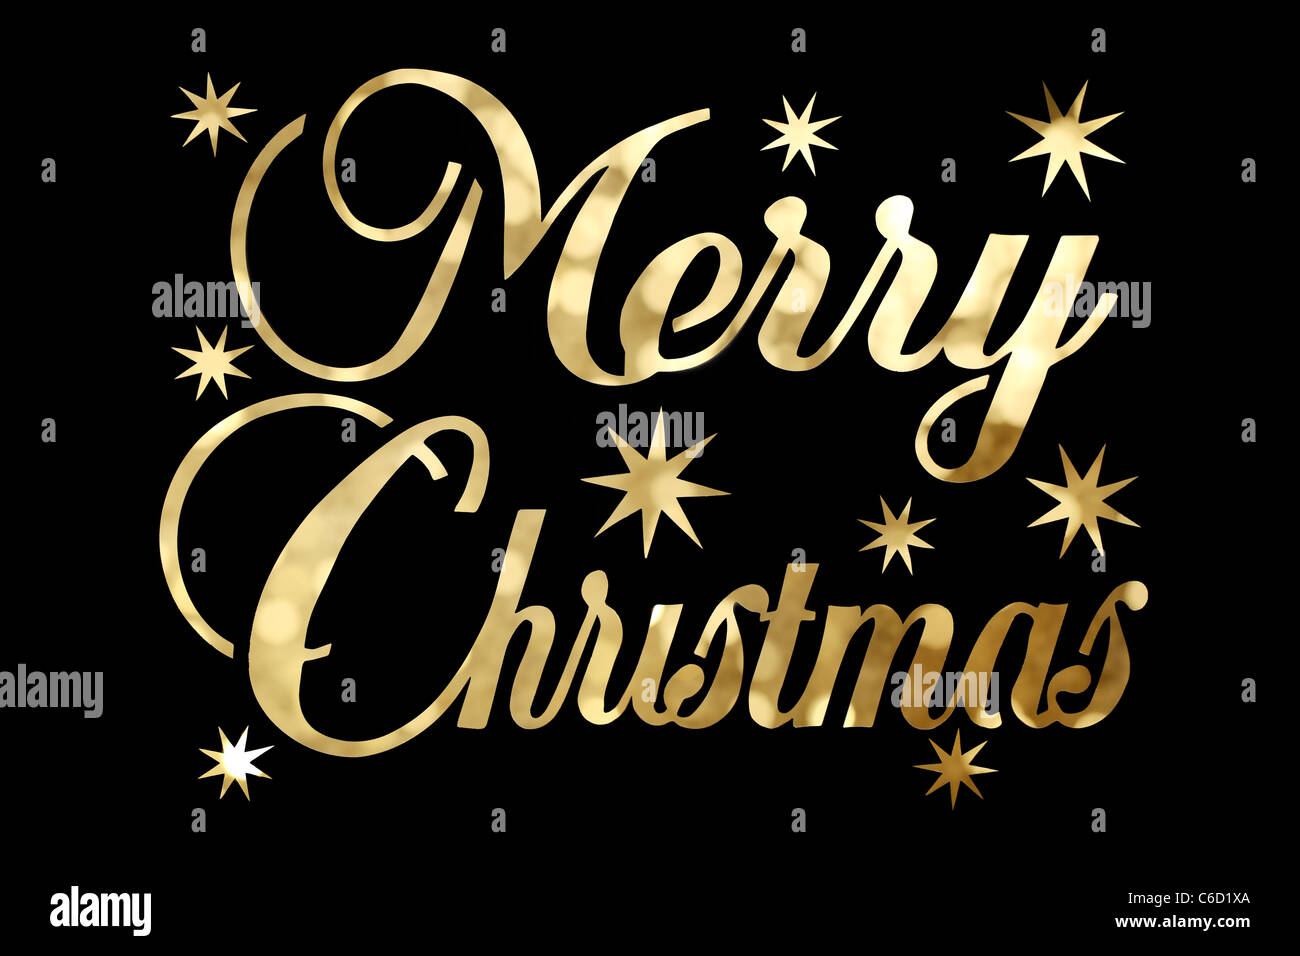 Golden Merry Christmas character isolated on black background. Stock Photo